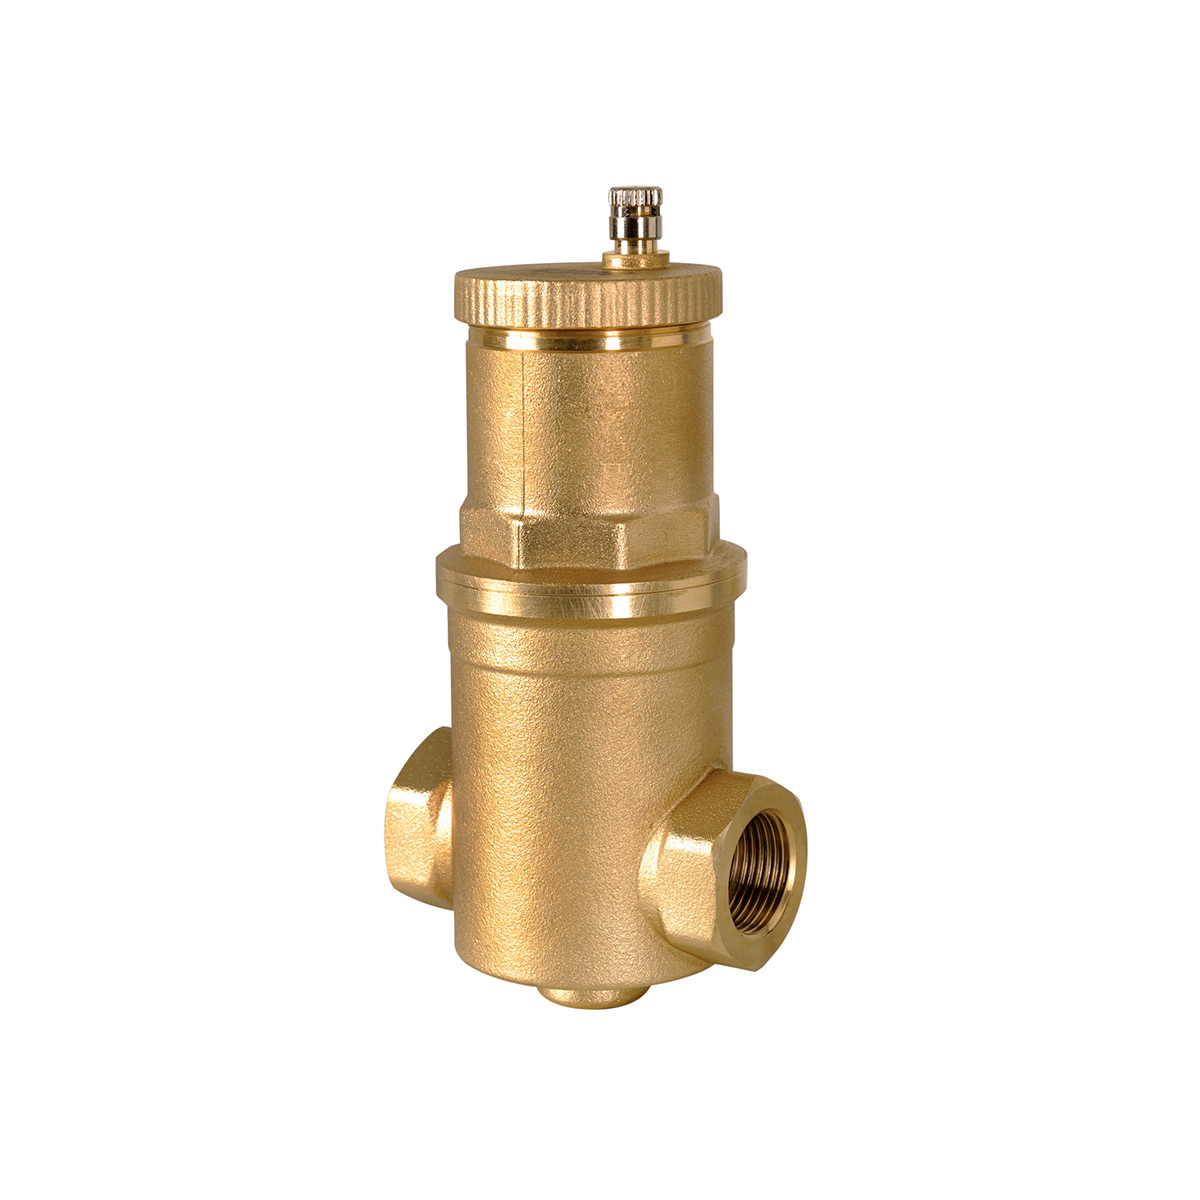 High capacity deaerator, for heating/conditioning systems